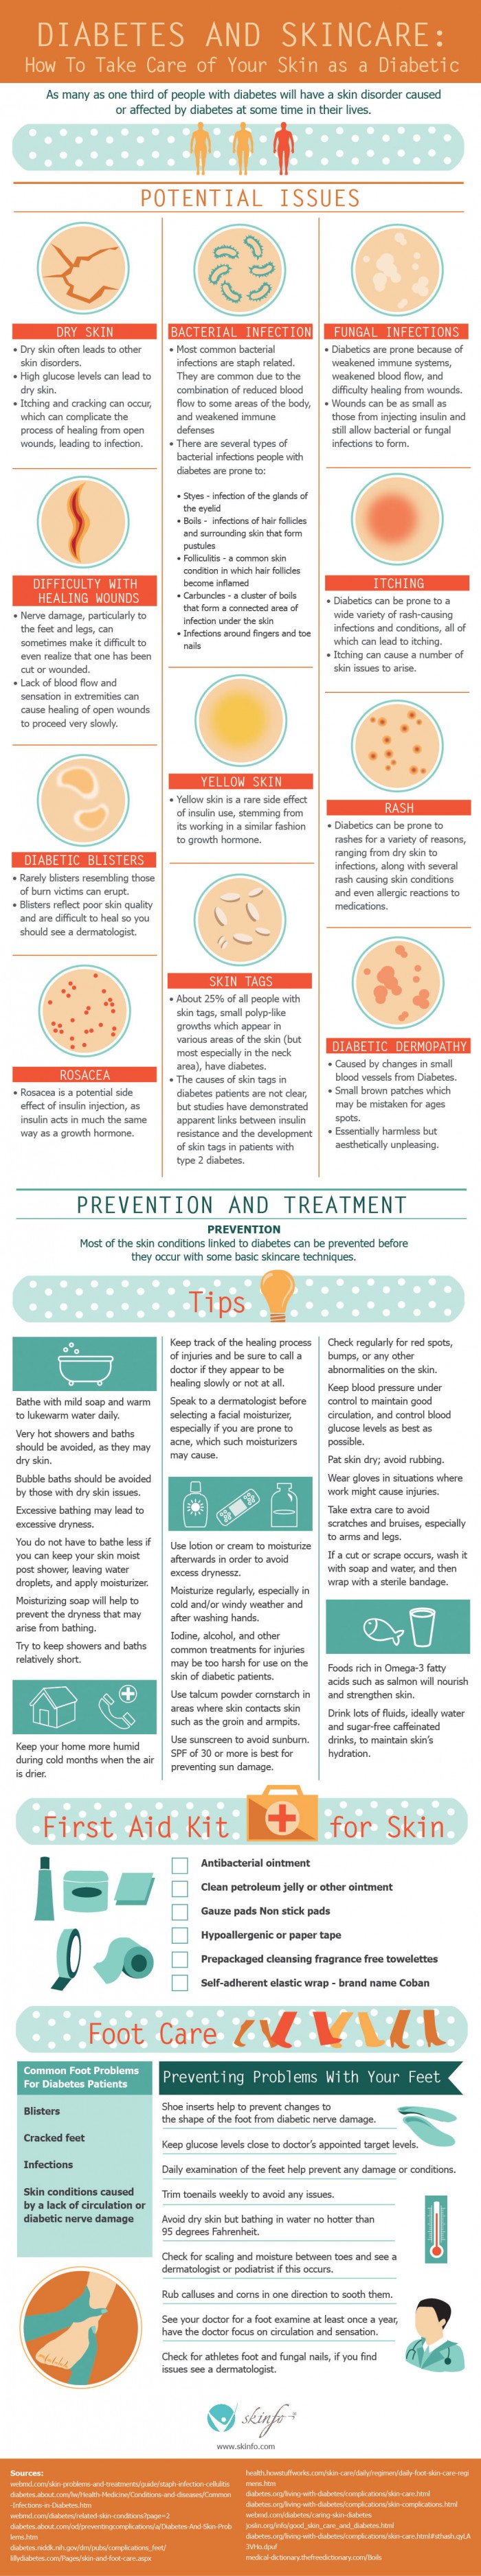 Link to diabetic skin issues infographic if you can't see this image: http://www.skinfo.com/blog/diabetes-skincare/#.VMgTUkfF8Vg